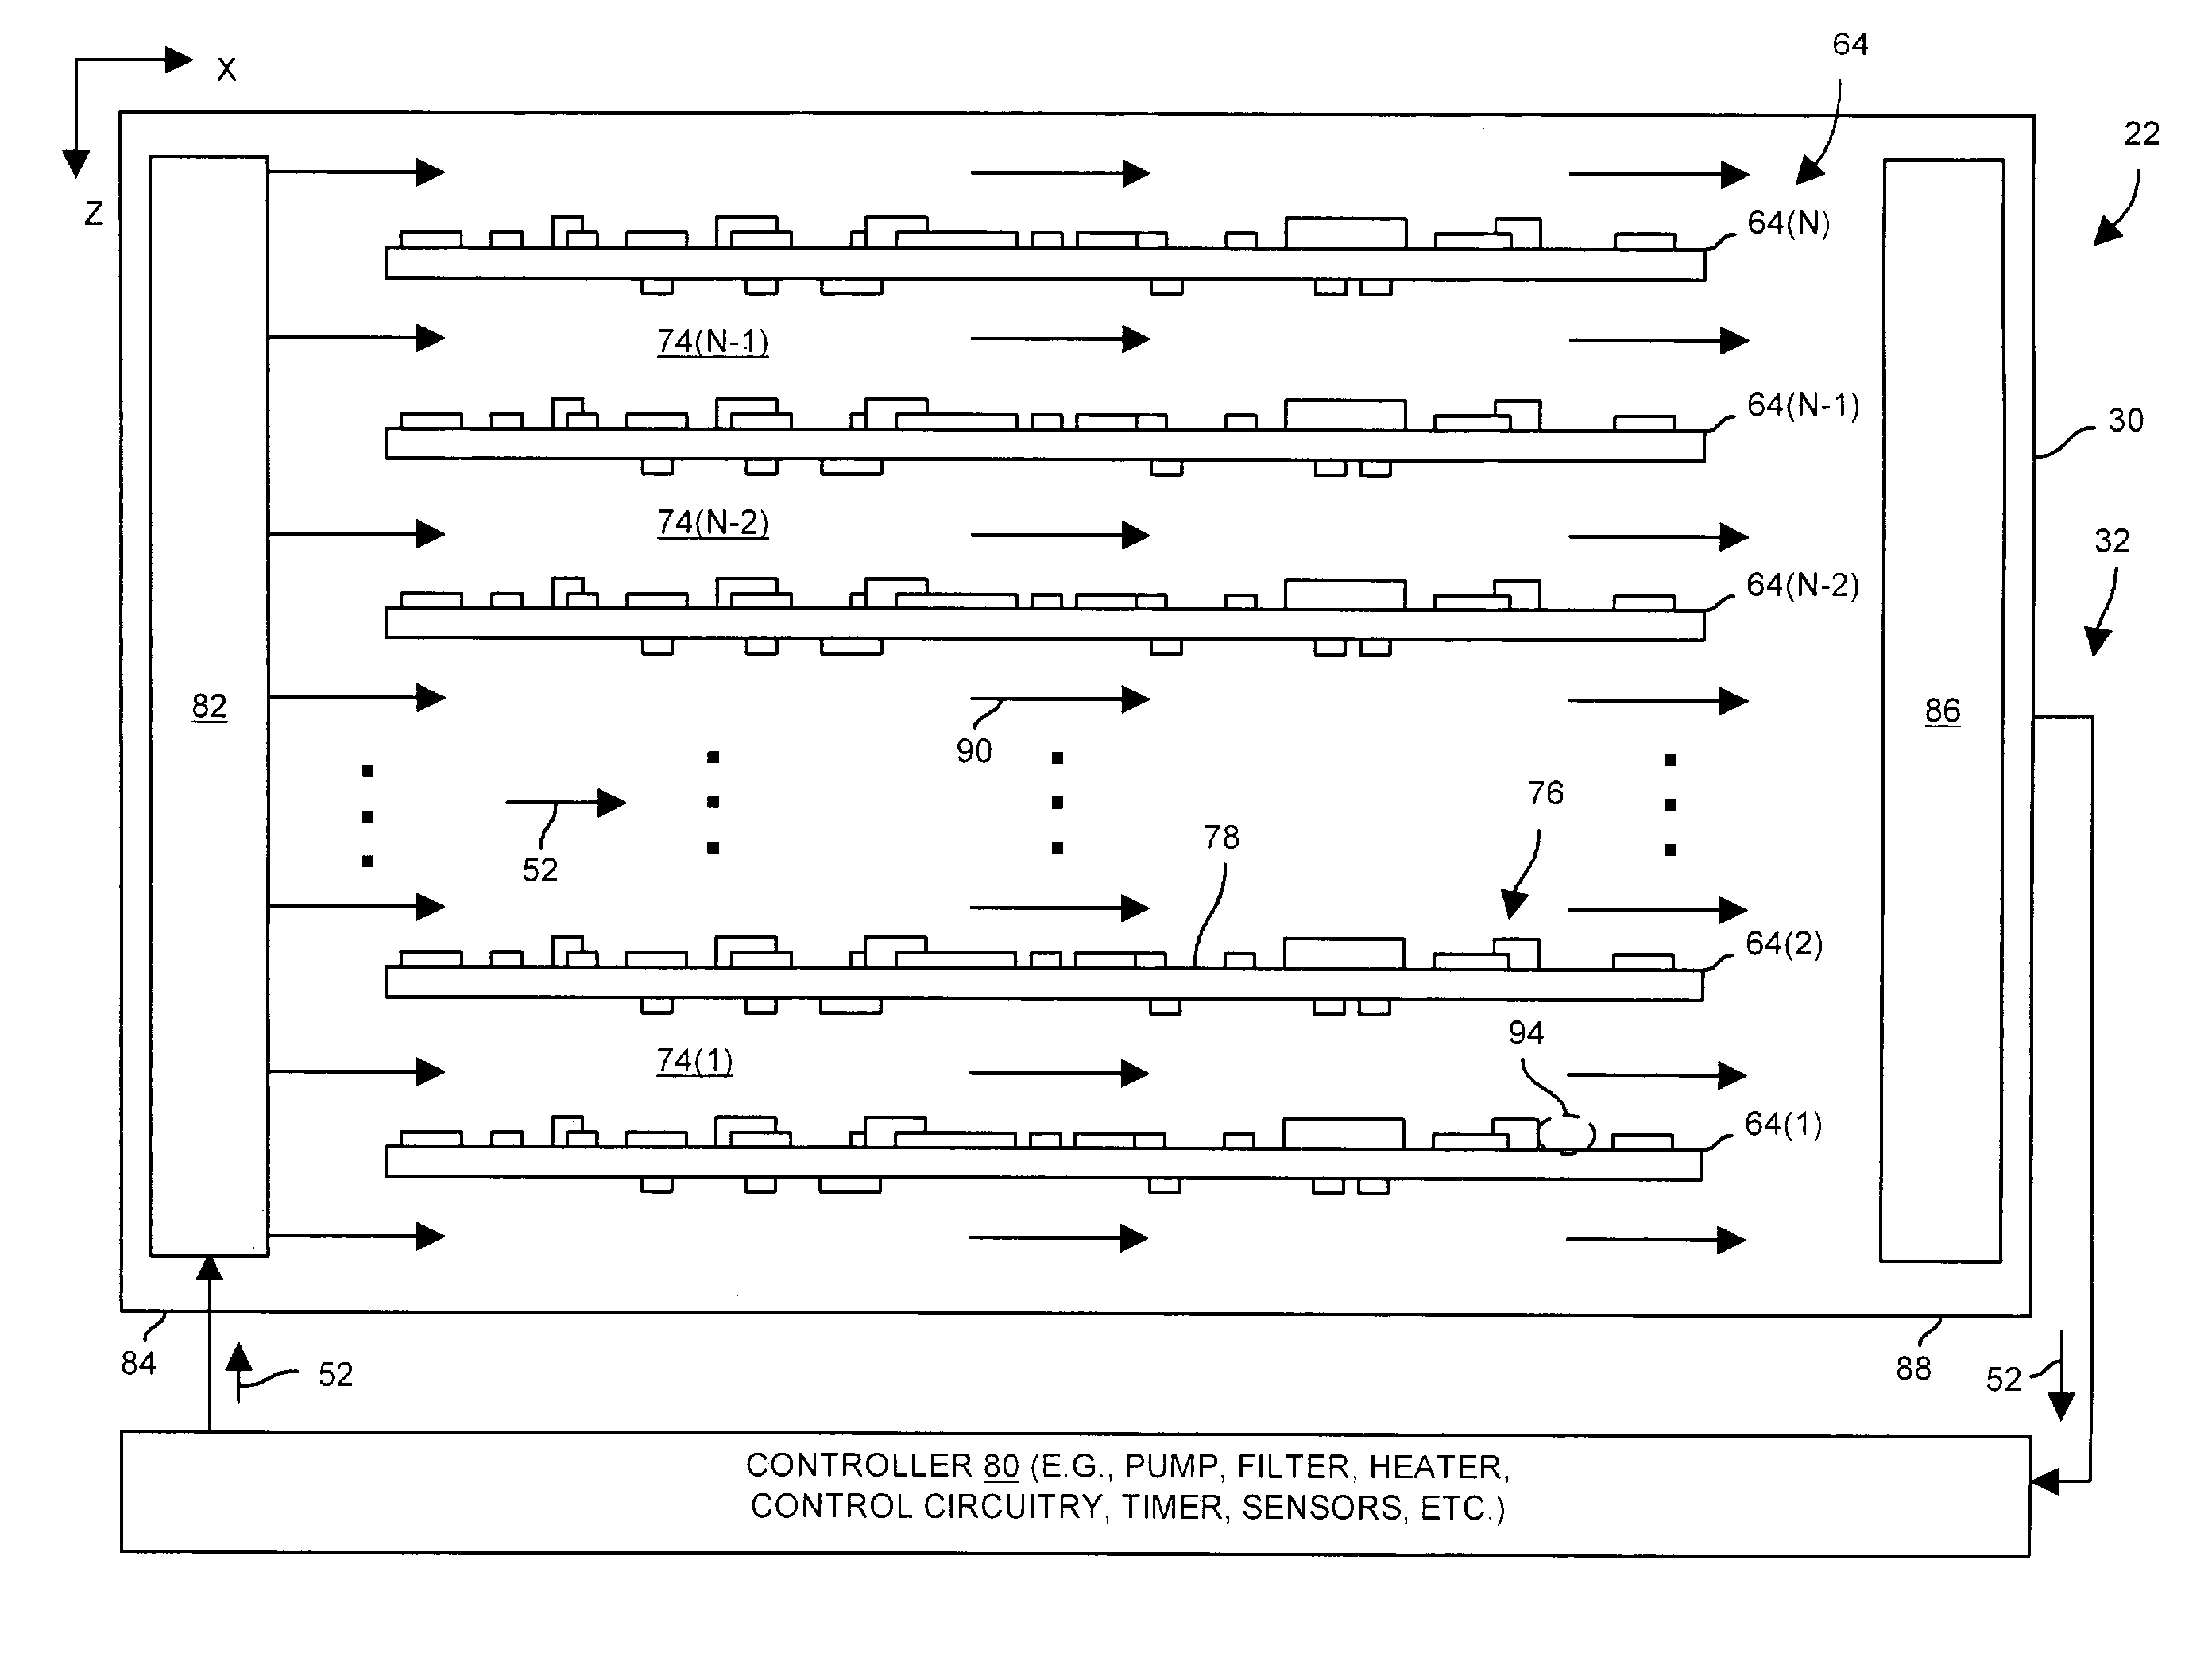 Systems and methods for processing a set of circuit boards